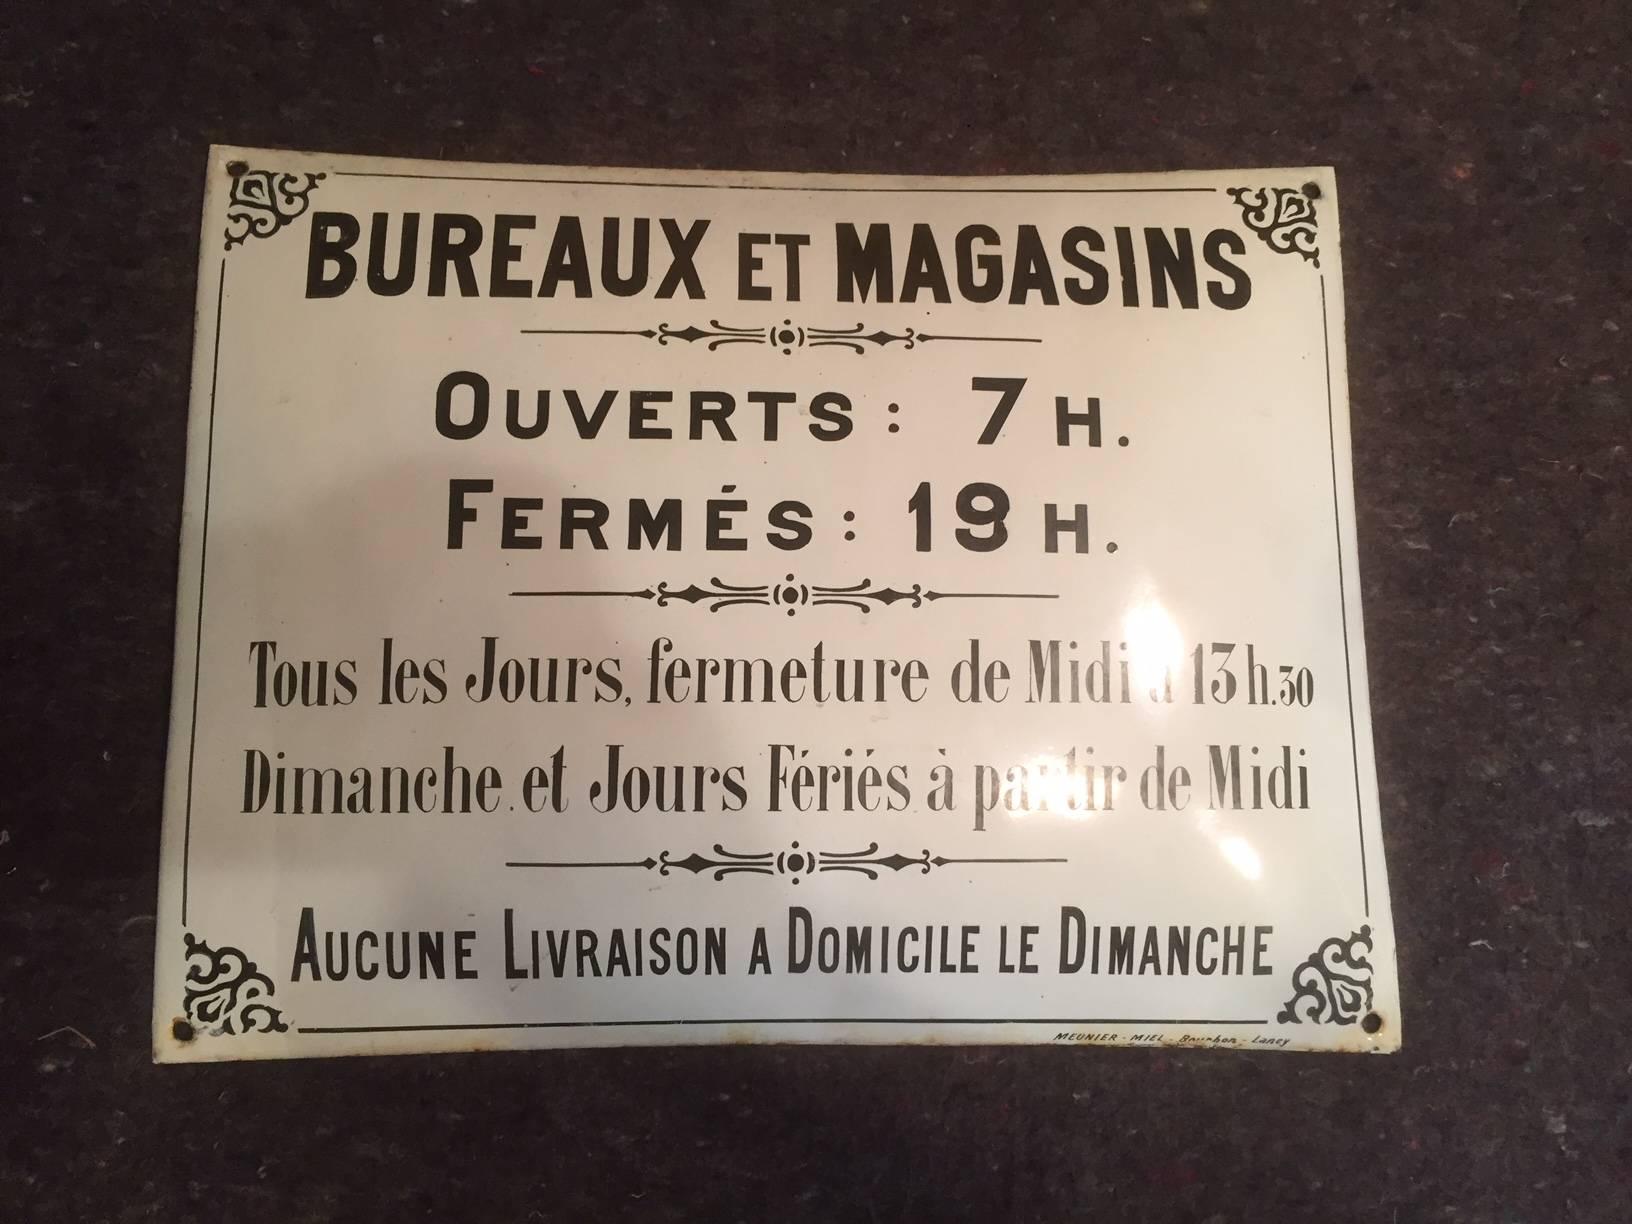 French curved enamelled sheet metal advertising sign.
English translate:
Office and stores
Open: 7 am
Closed: 19 pm
Every day close from Midday to 13.30 pm
Sunday and Public holiday from noon
No home delivery on Sunday’s.